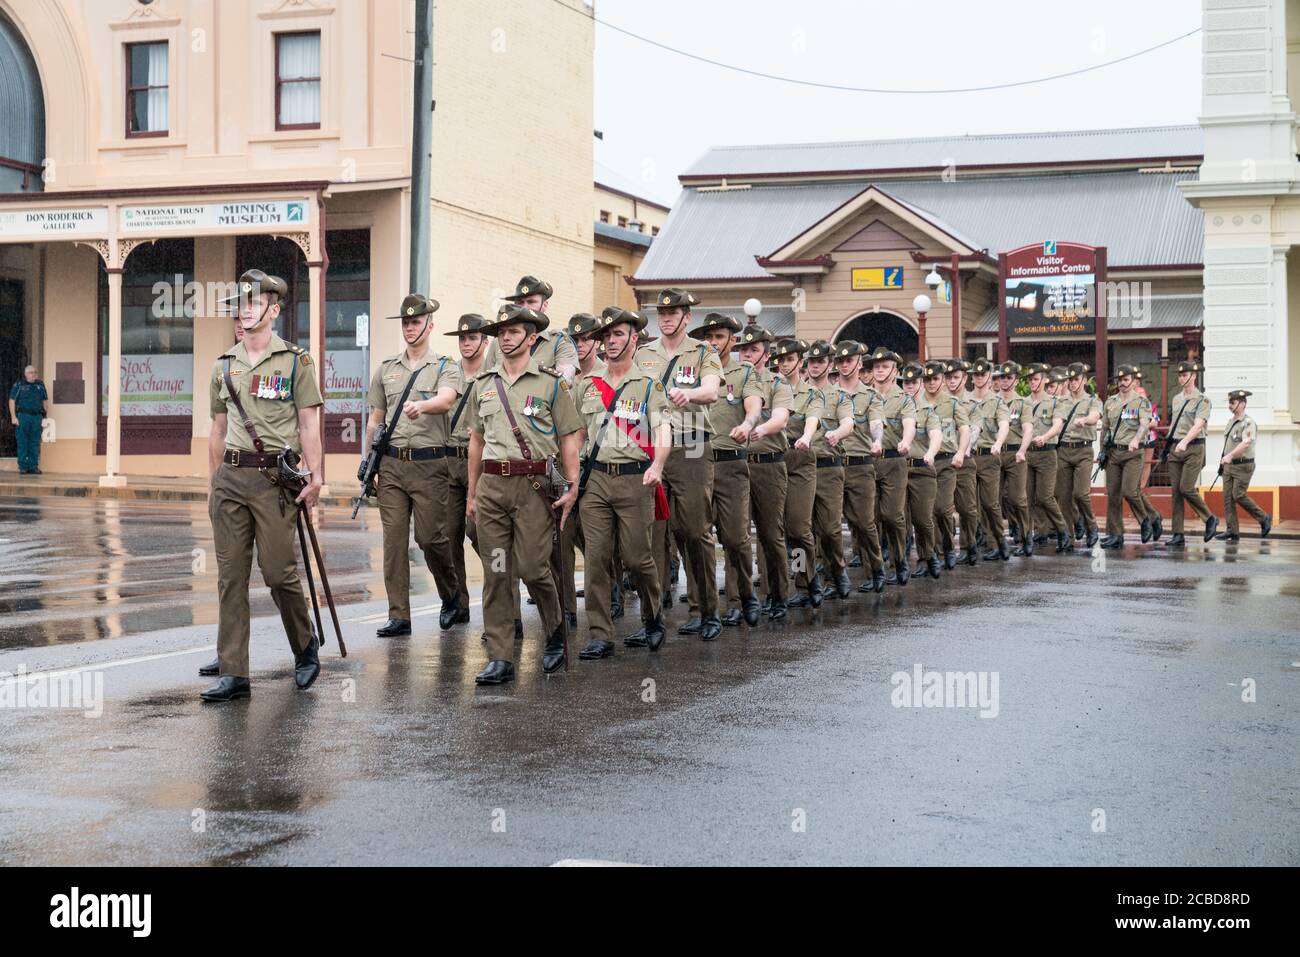 Charters Towers, Australia - April 25, 2019: Soldiers of the 1st Battalion, Royal Australian Regiment (1 RAR) marching in the rain on Anzac Day Stock Photo